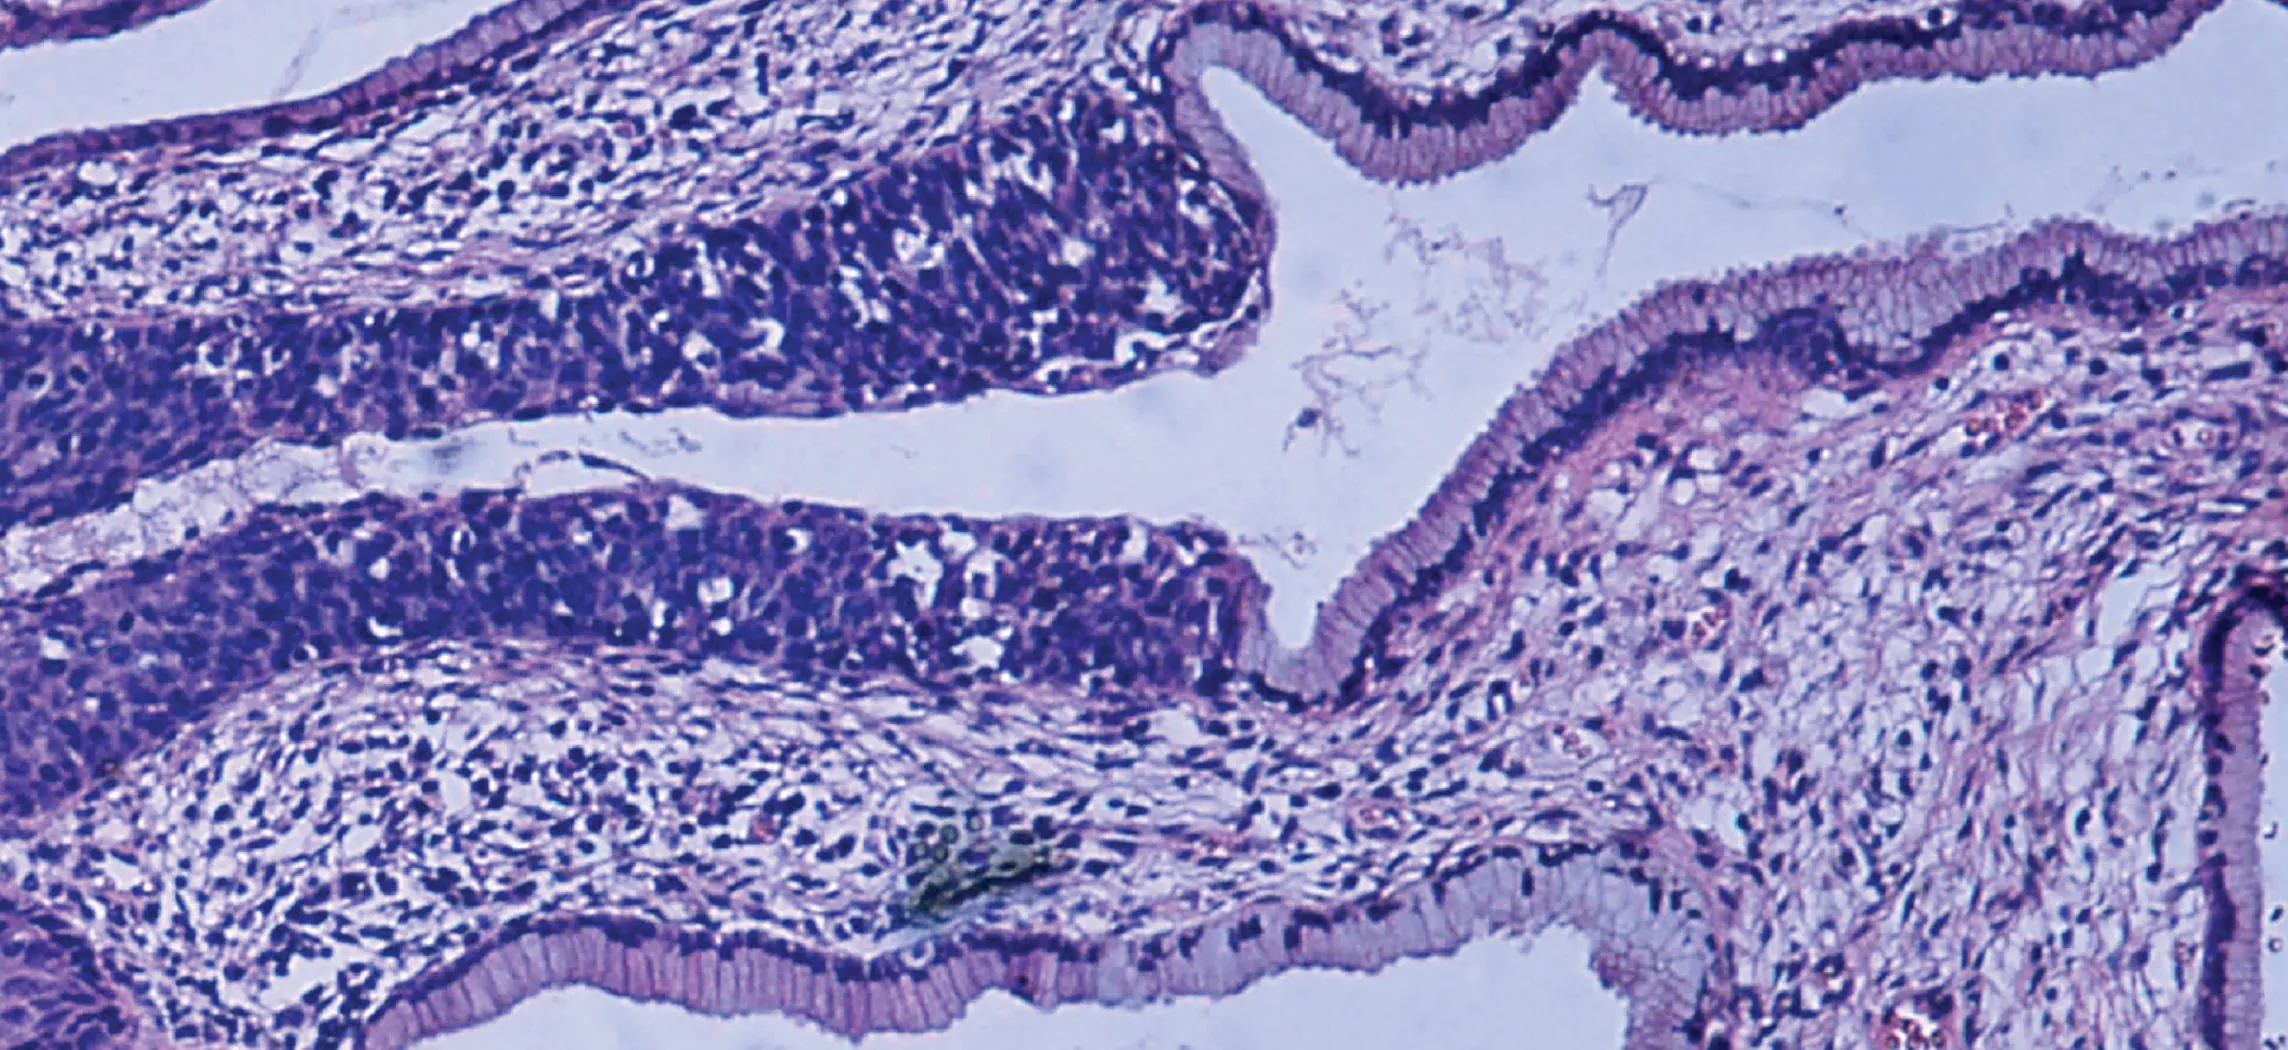 This micrograph shows tissue surrounding several empty spaces. The epithelial tissue occurs at the border between the rest of the tissue and the empty spaces. The normal epithelium is composed of rectangular-shaped cells neatly organized side by side. Dark purple nuclei are clear at the bottom of the epithelial cells, where they attach to the rest of the tissue. The abnormal epithelium appears as a tangled area of purple nuclei, much thicker than the normal epithelium although no distinct cells are discernible.